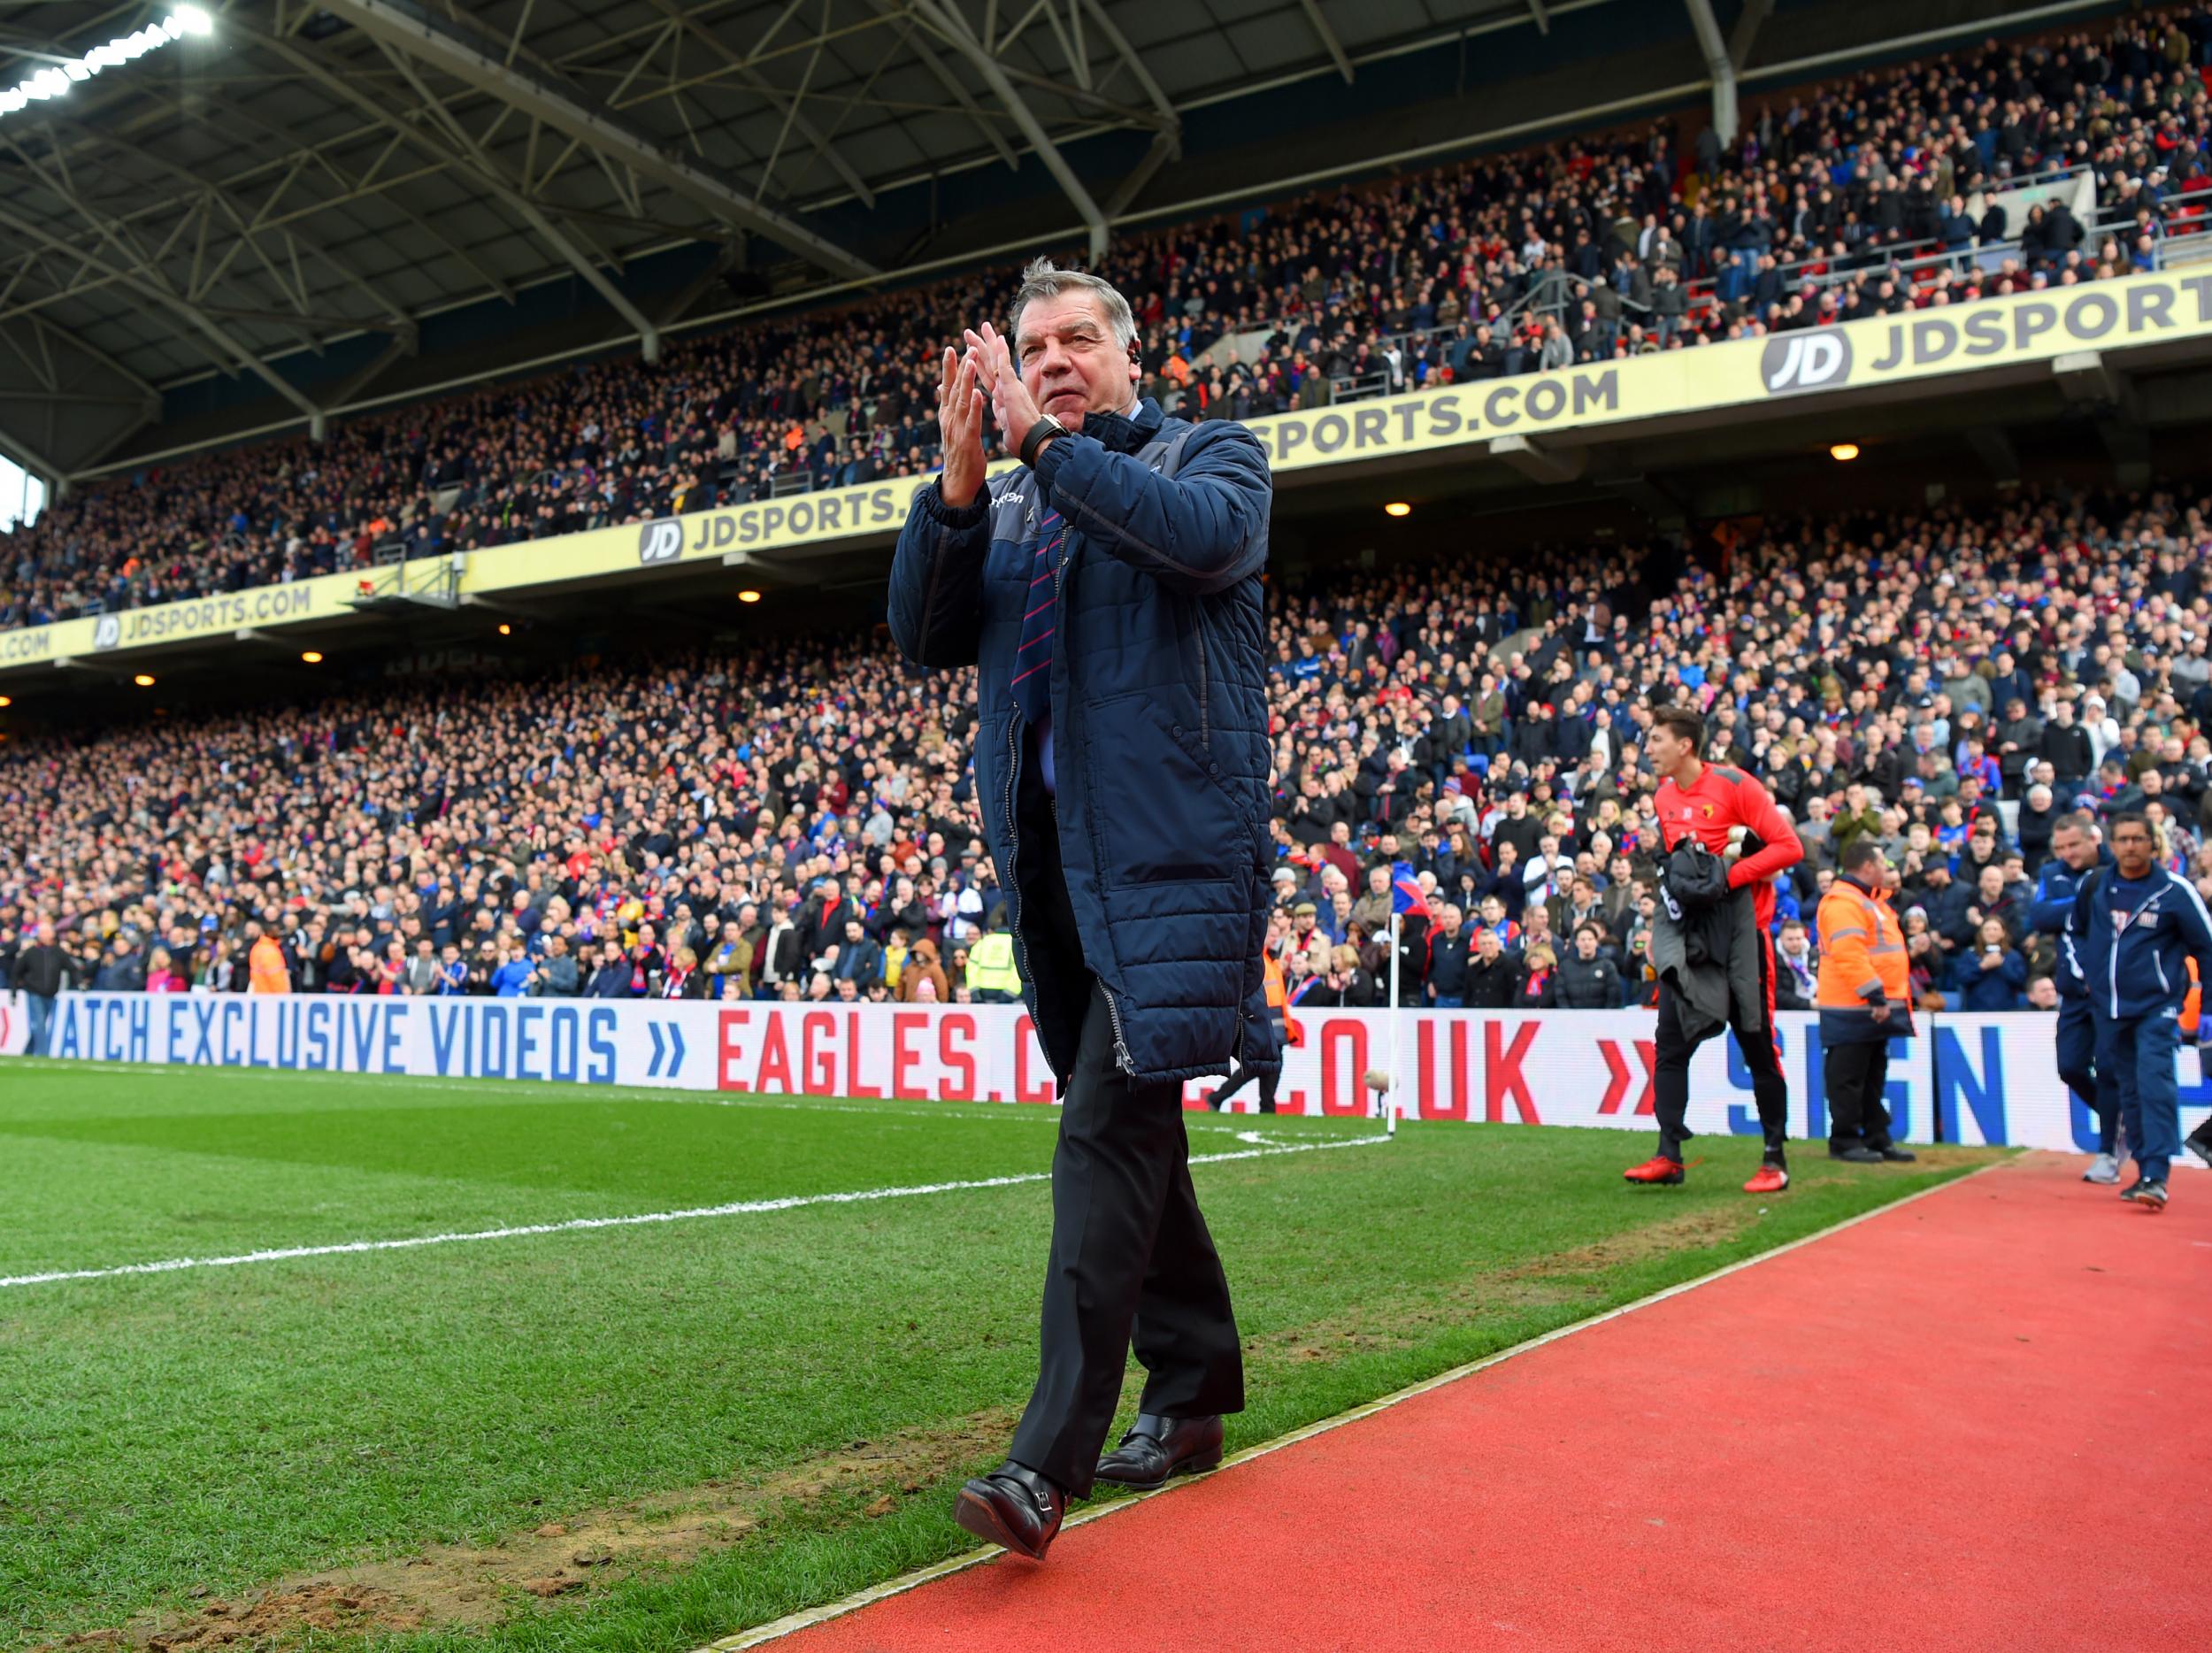 Allardyce deserves credit for Palace's improved performances of late